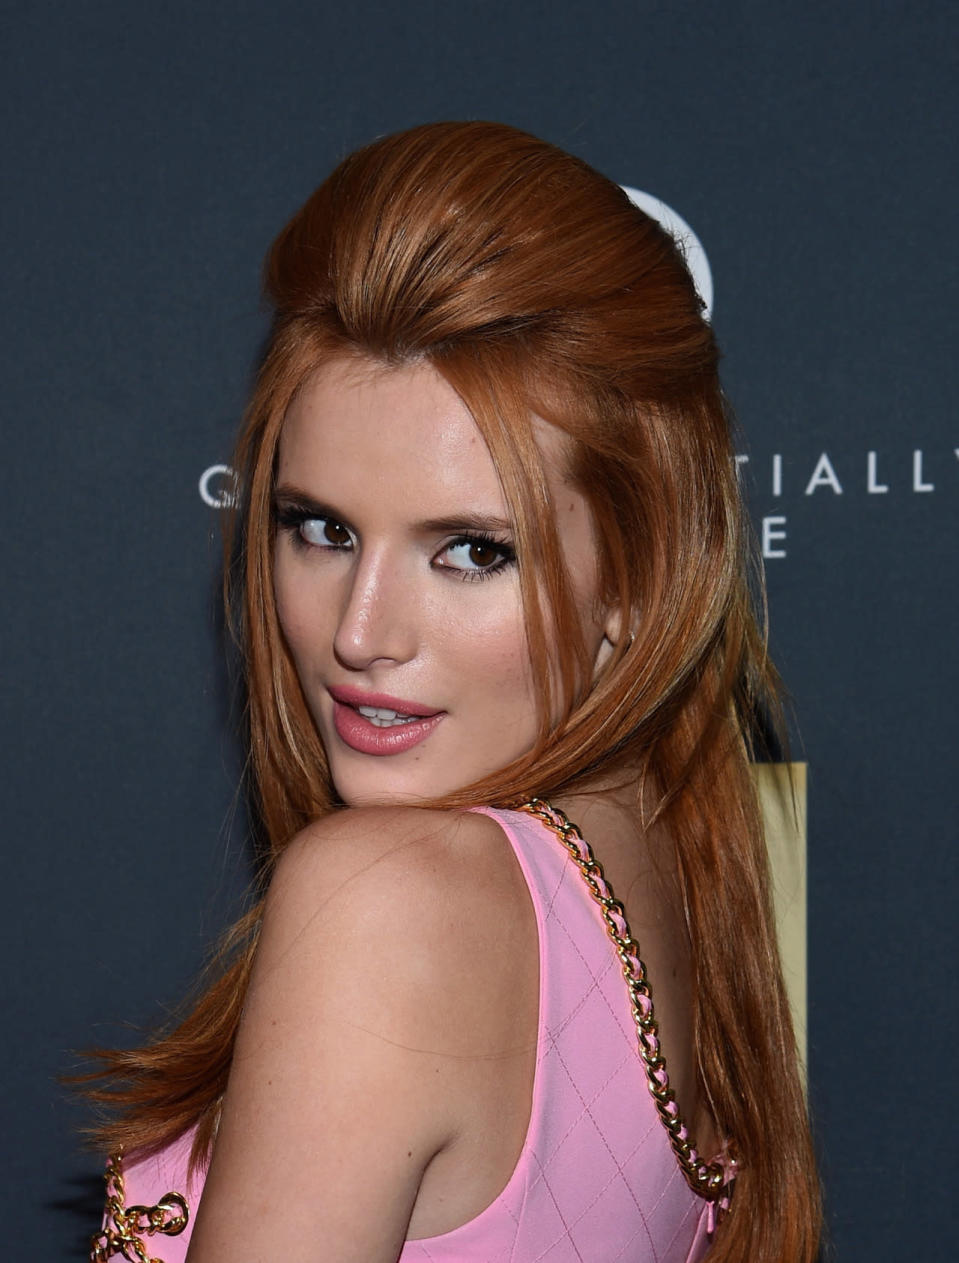 Bella Thorne at the Premiere of Jeremy Scott: The People’s Designer, 2015